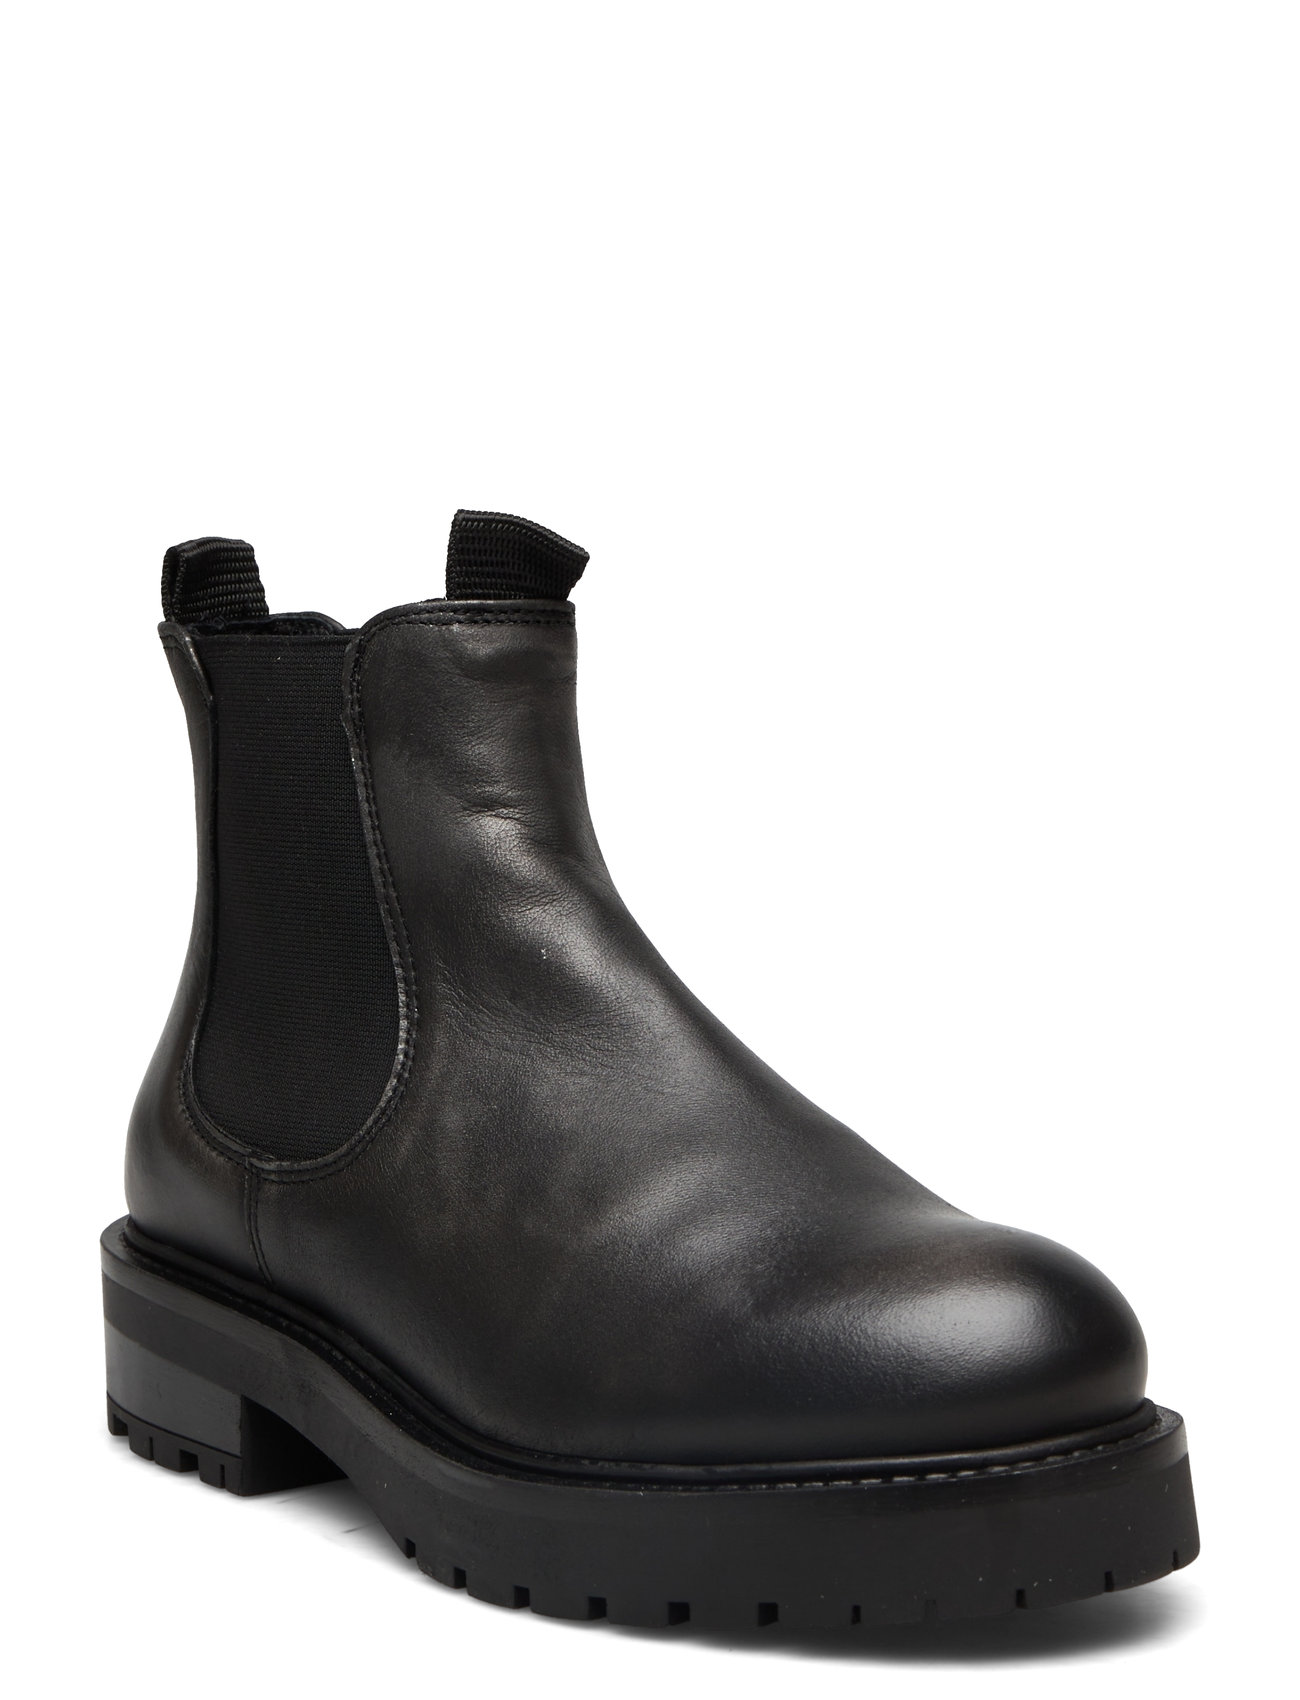 Marit Two-T Shoes Boots Ankle Boots Ankle Boots Flat Heel Black Pavement